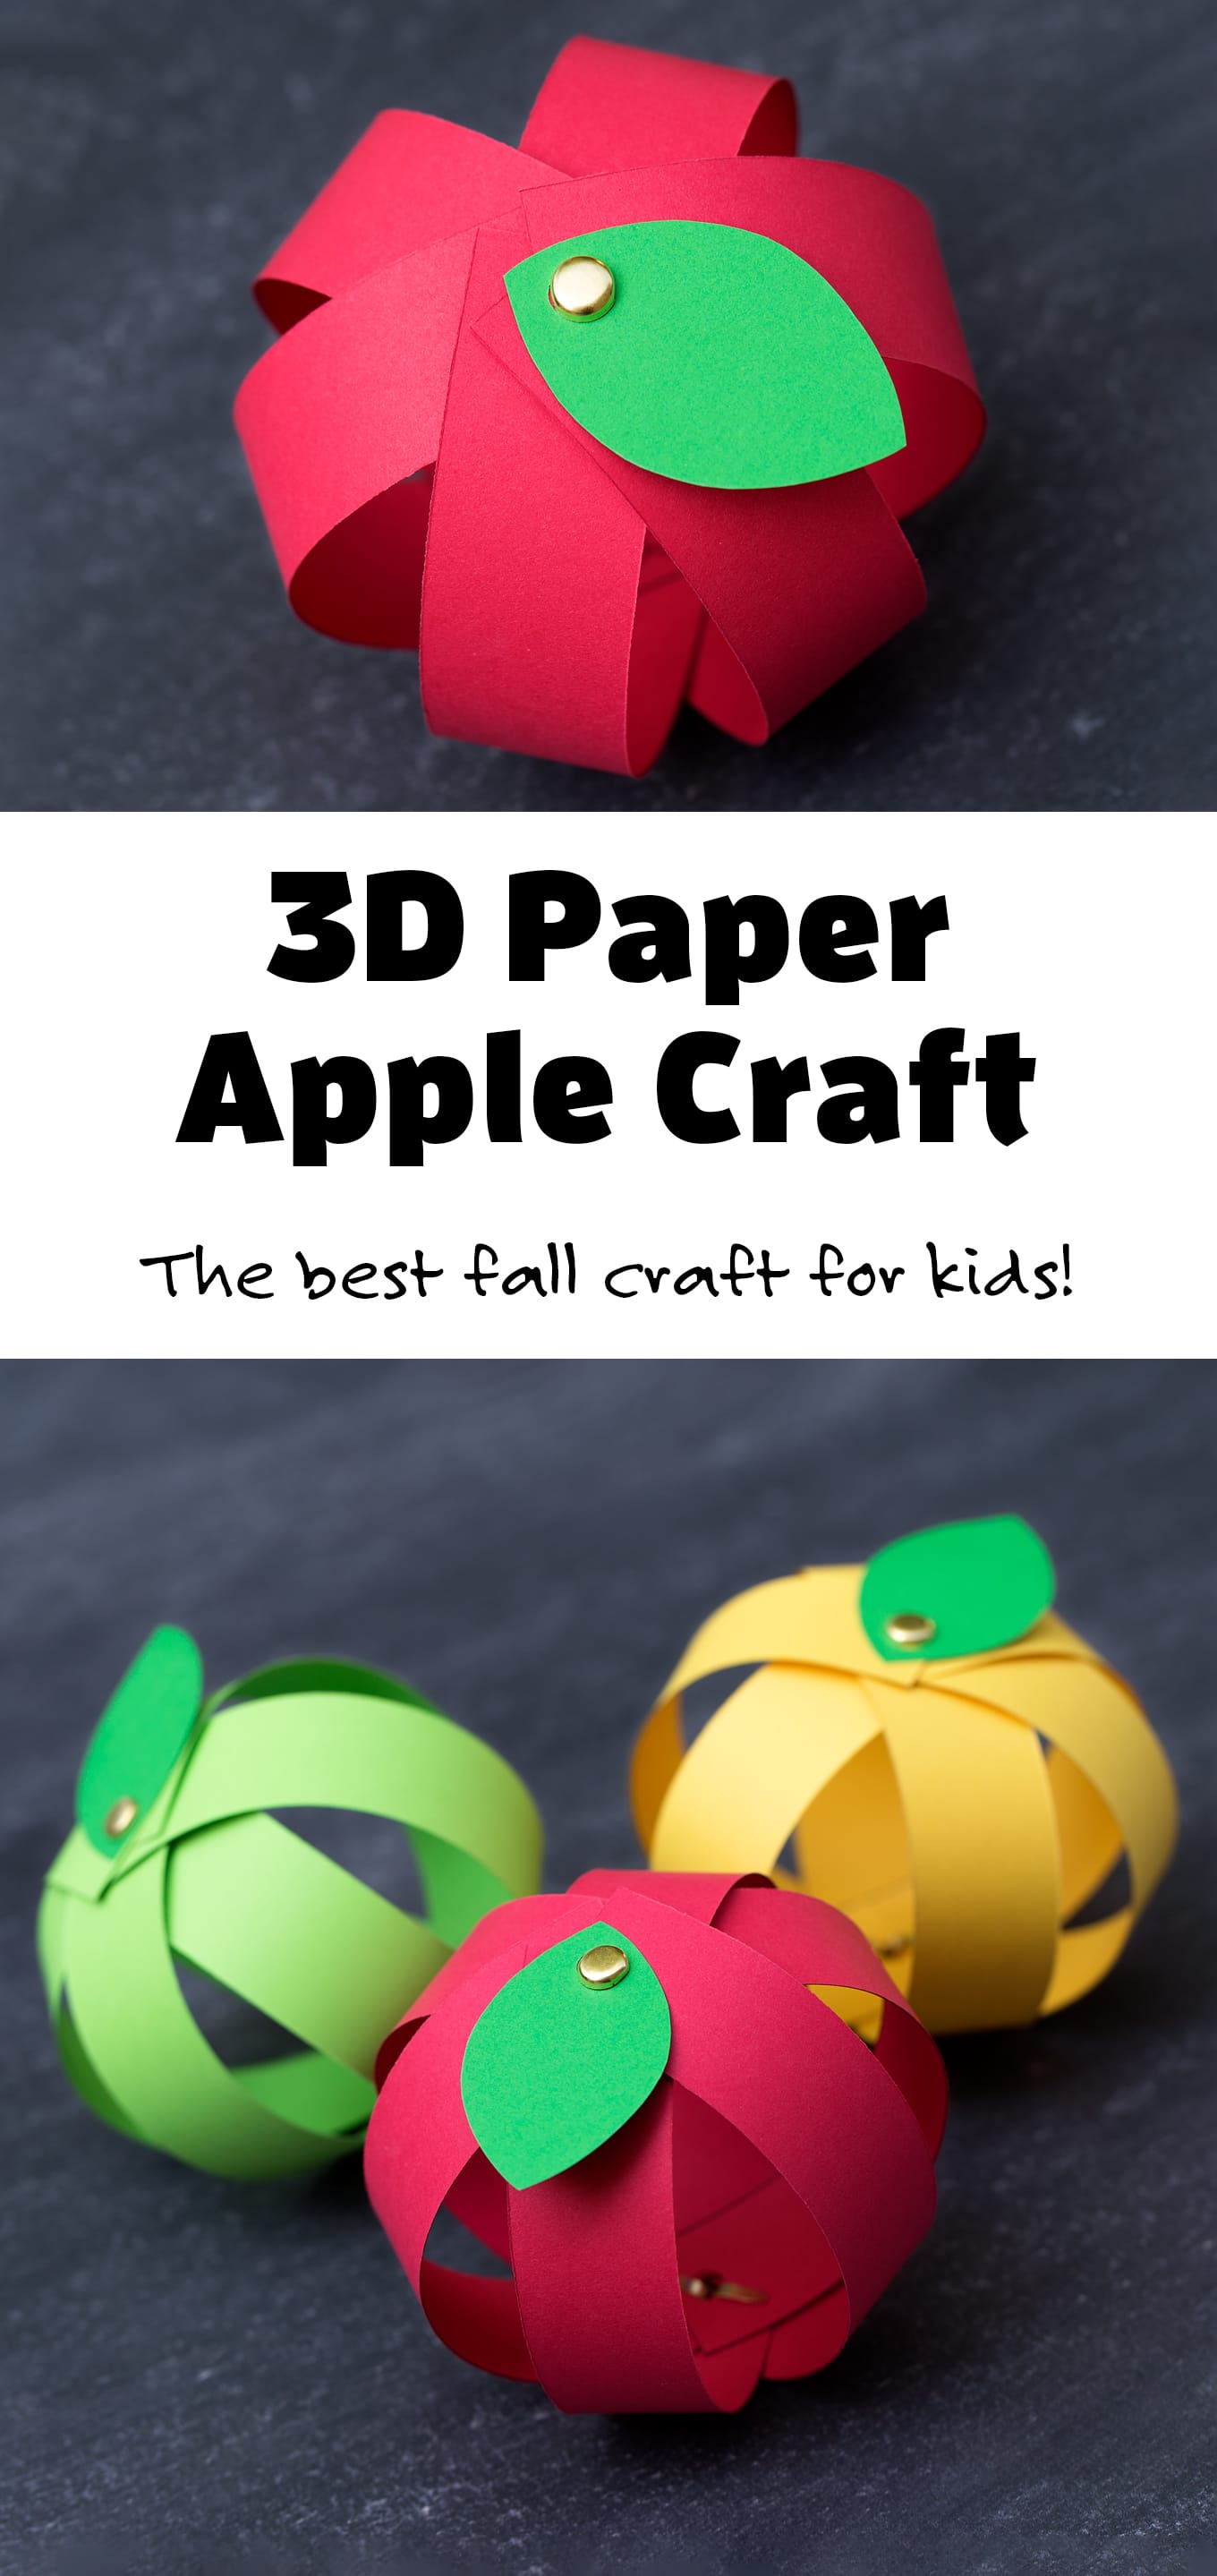 Make Your Own Easy Paper Apple Craft with Free Printable Template